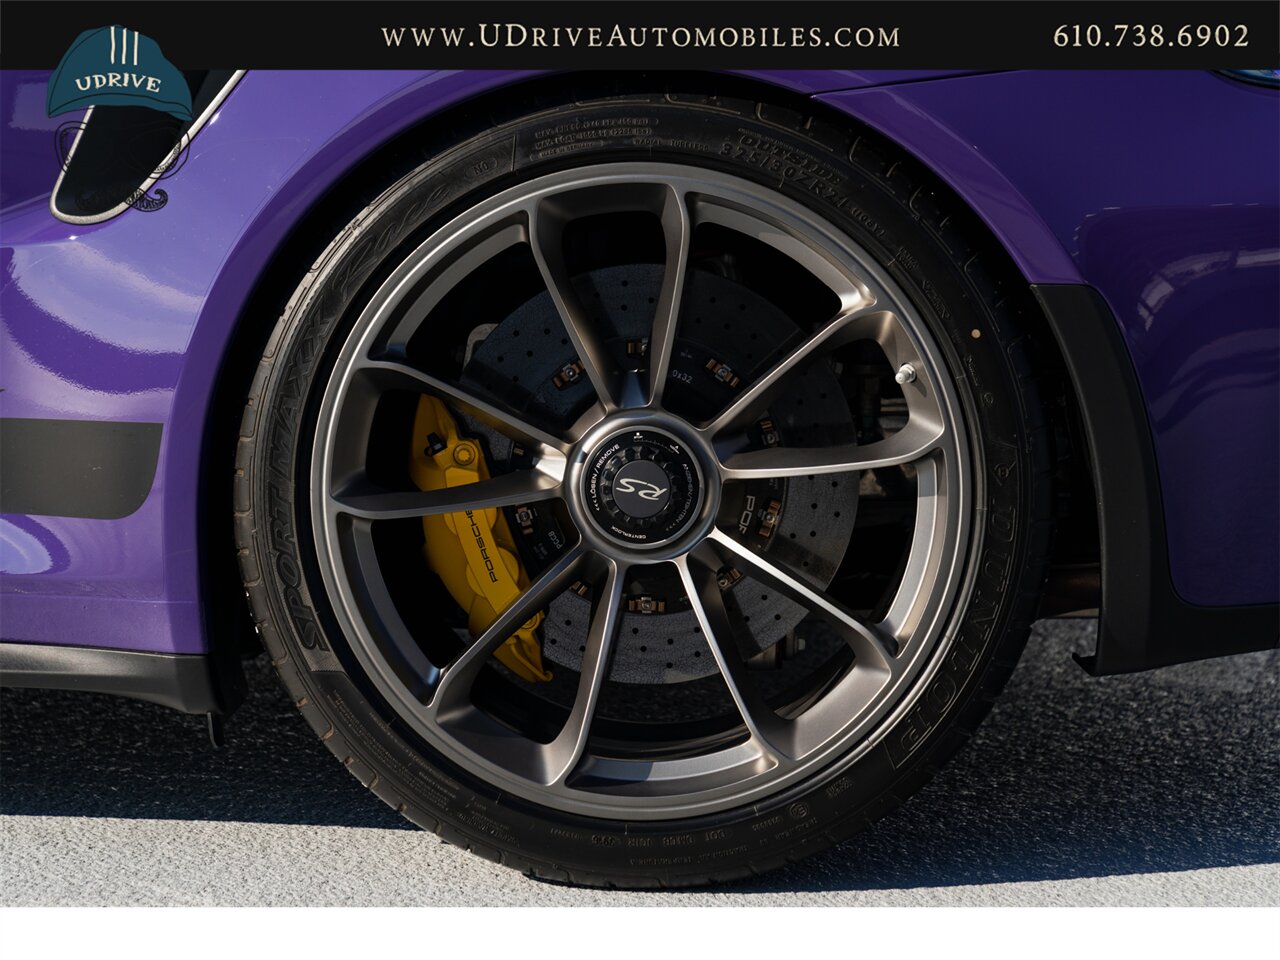 2016 Porsche 911 GT3 RS  1k Miles PCCB Front Axle Lift Yellow Stitching - Photo 70 - West Chester, PA 19382